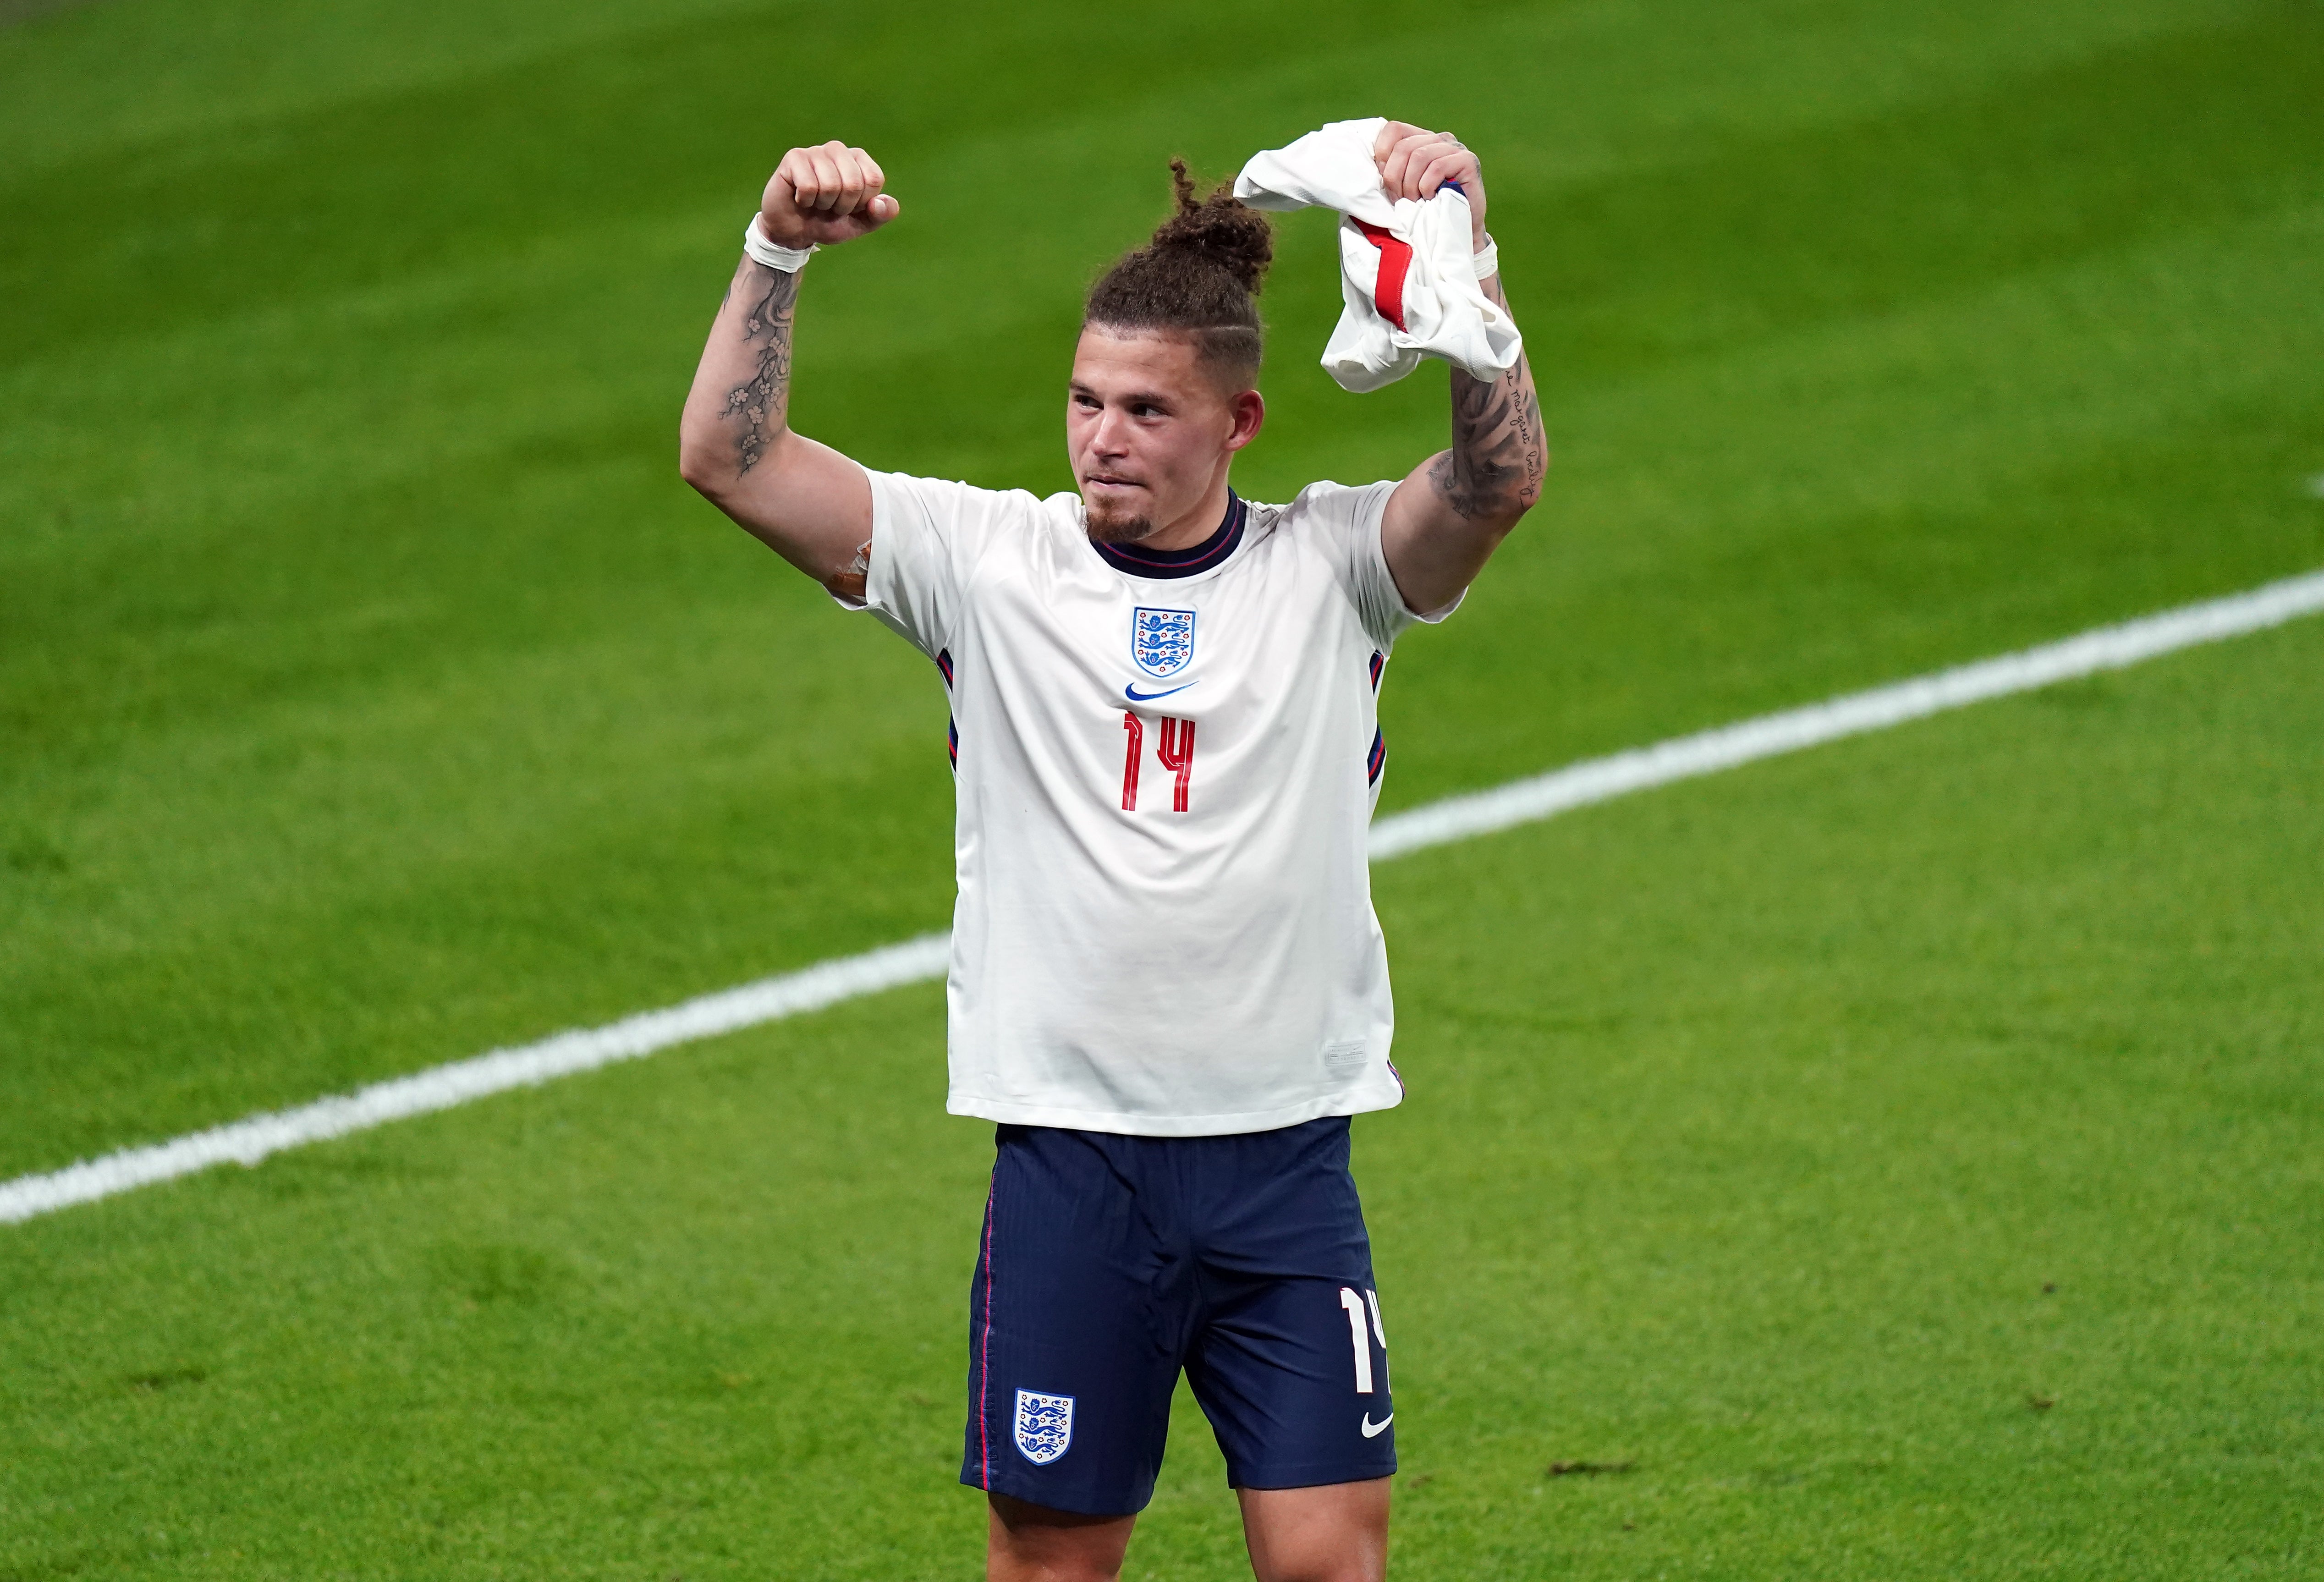 Kalvin Phillips played a key role for England at Euro 2020